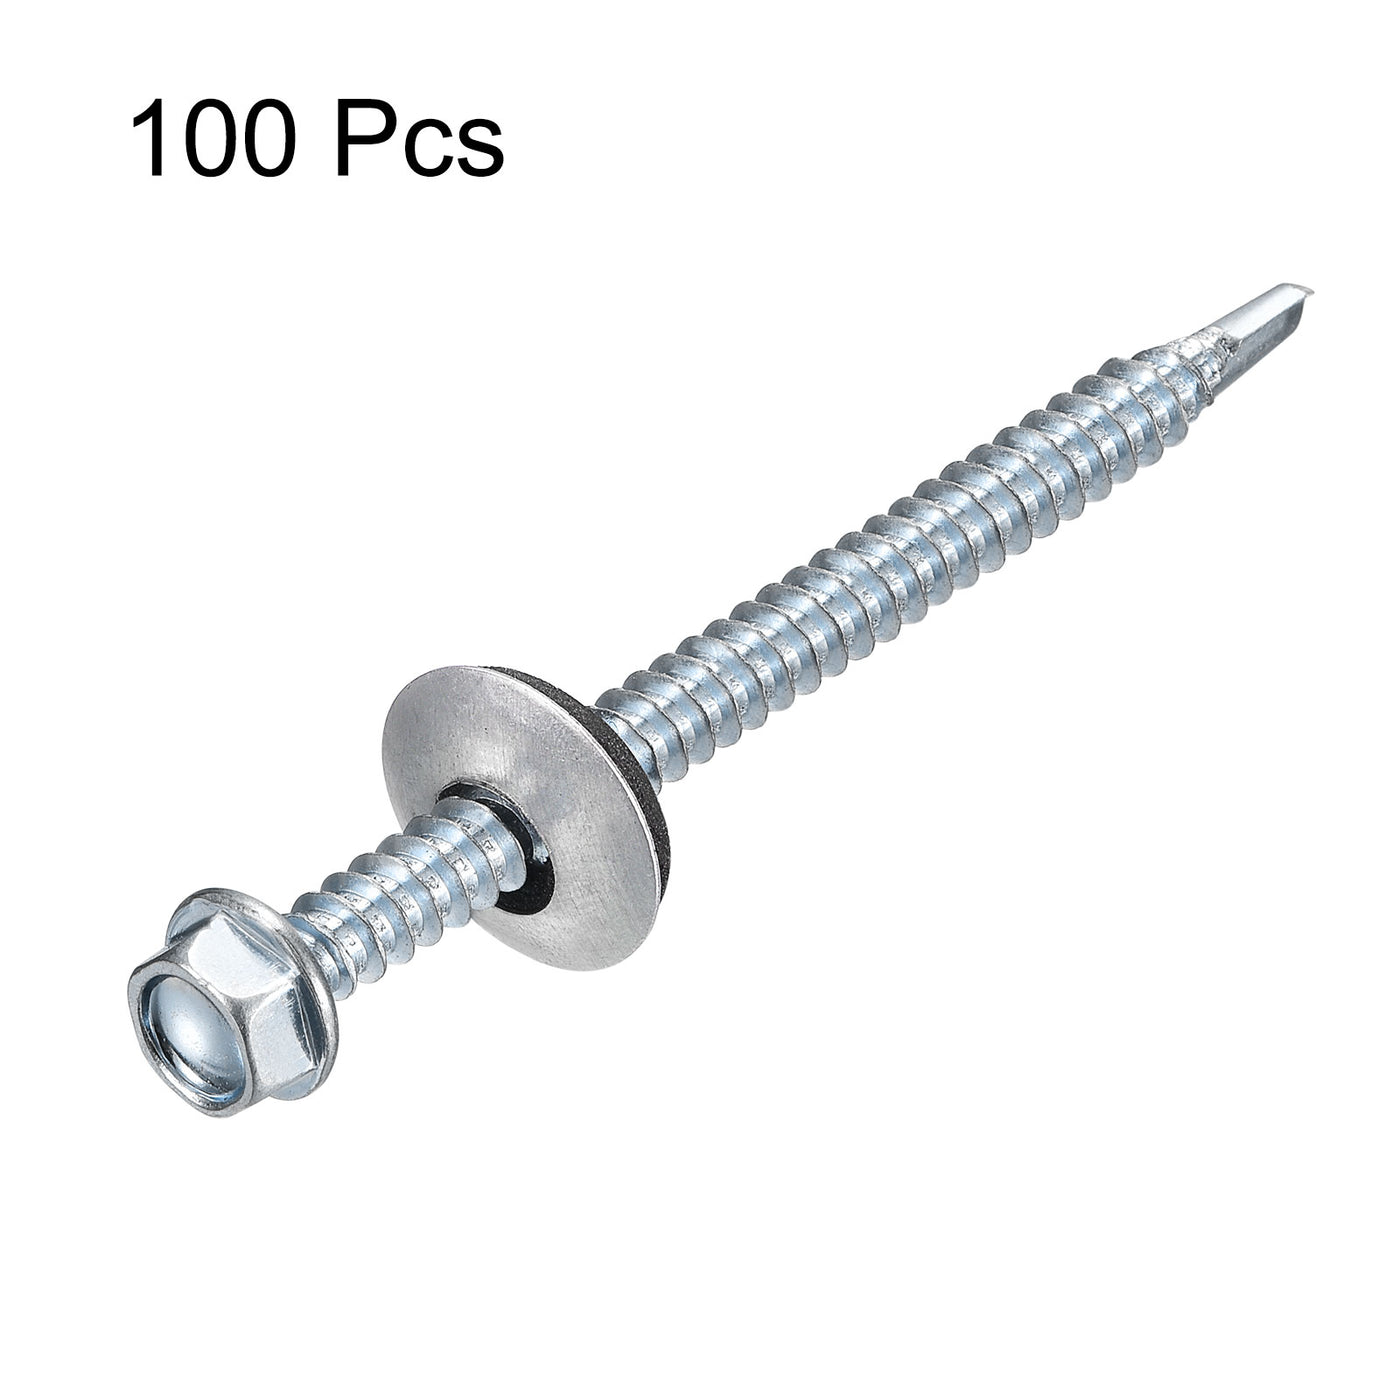 uxcell Uxcell #12 x 2-61/64" Self Drilling Screws, 100pcs Roofing Screws with EPDM Washer